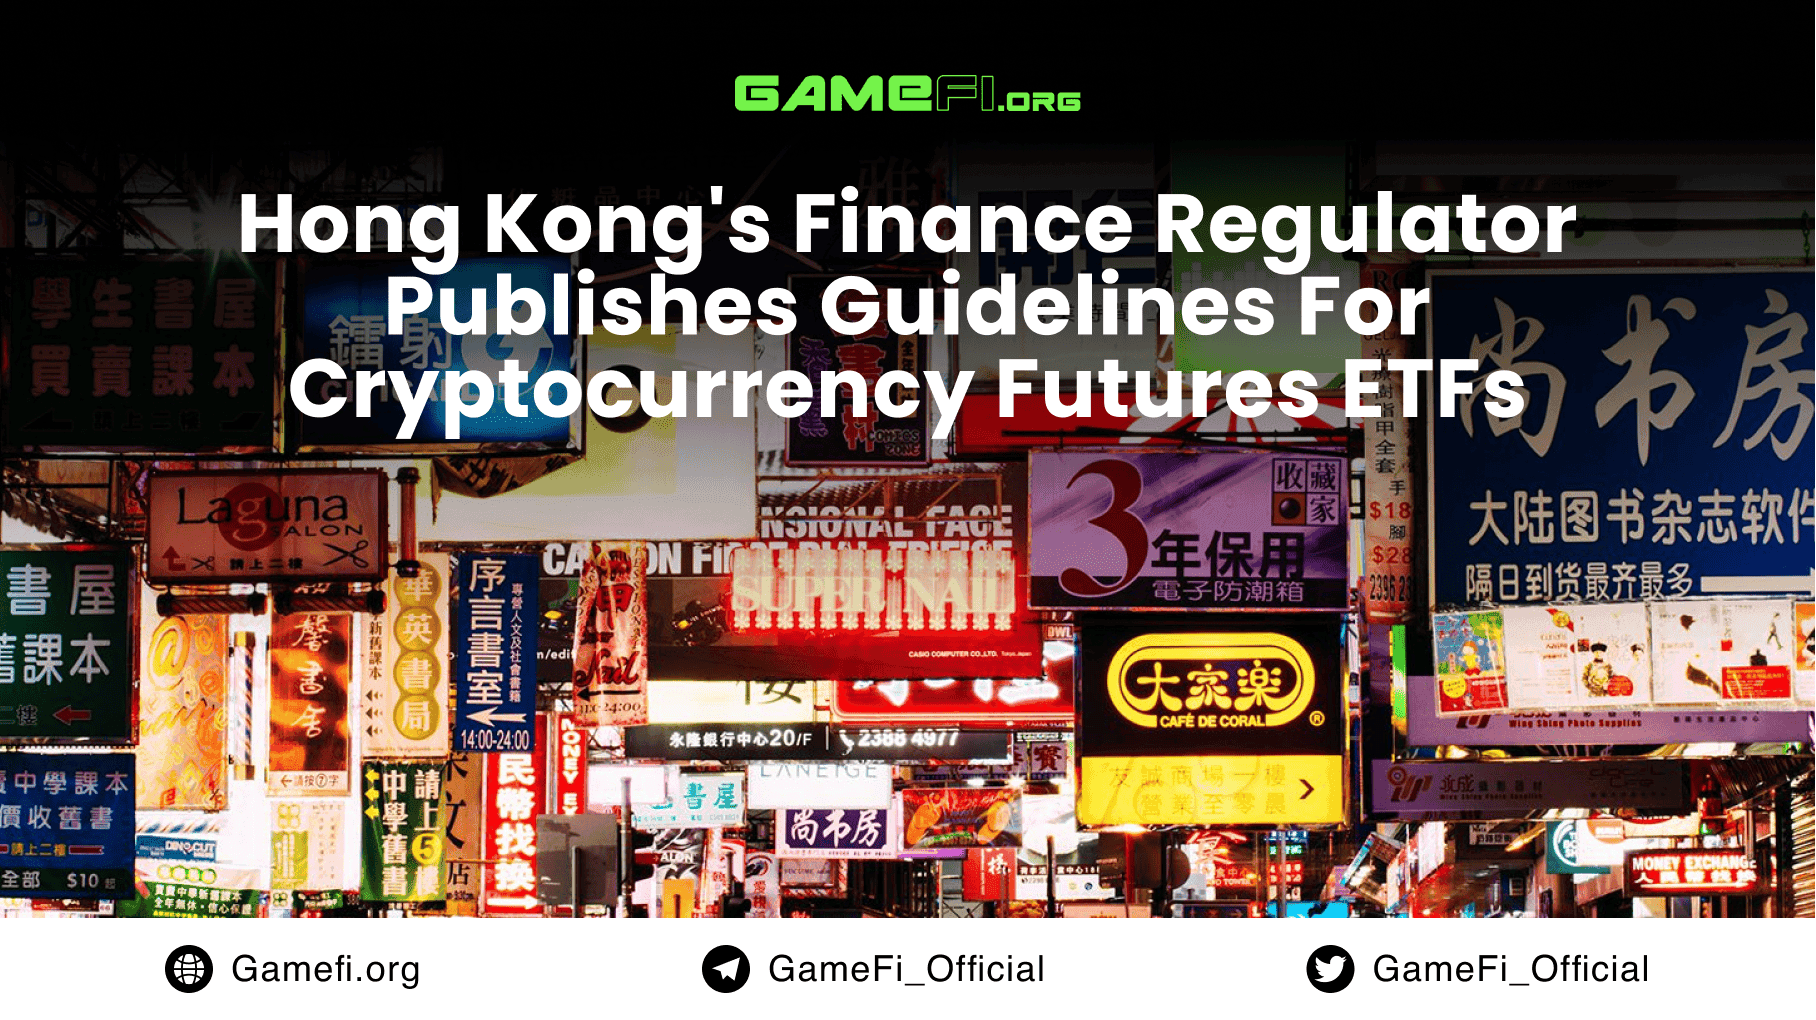 Hong Kong's Finance Regulator Publishes Guidelines For Cryptocurrency Futures ETFs